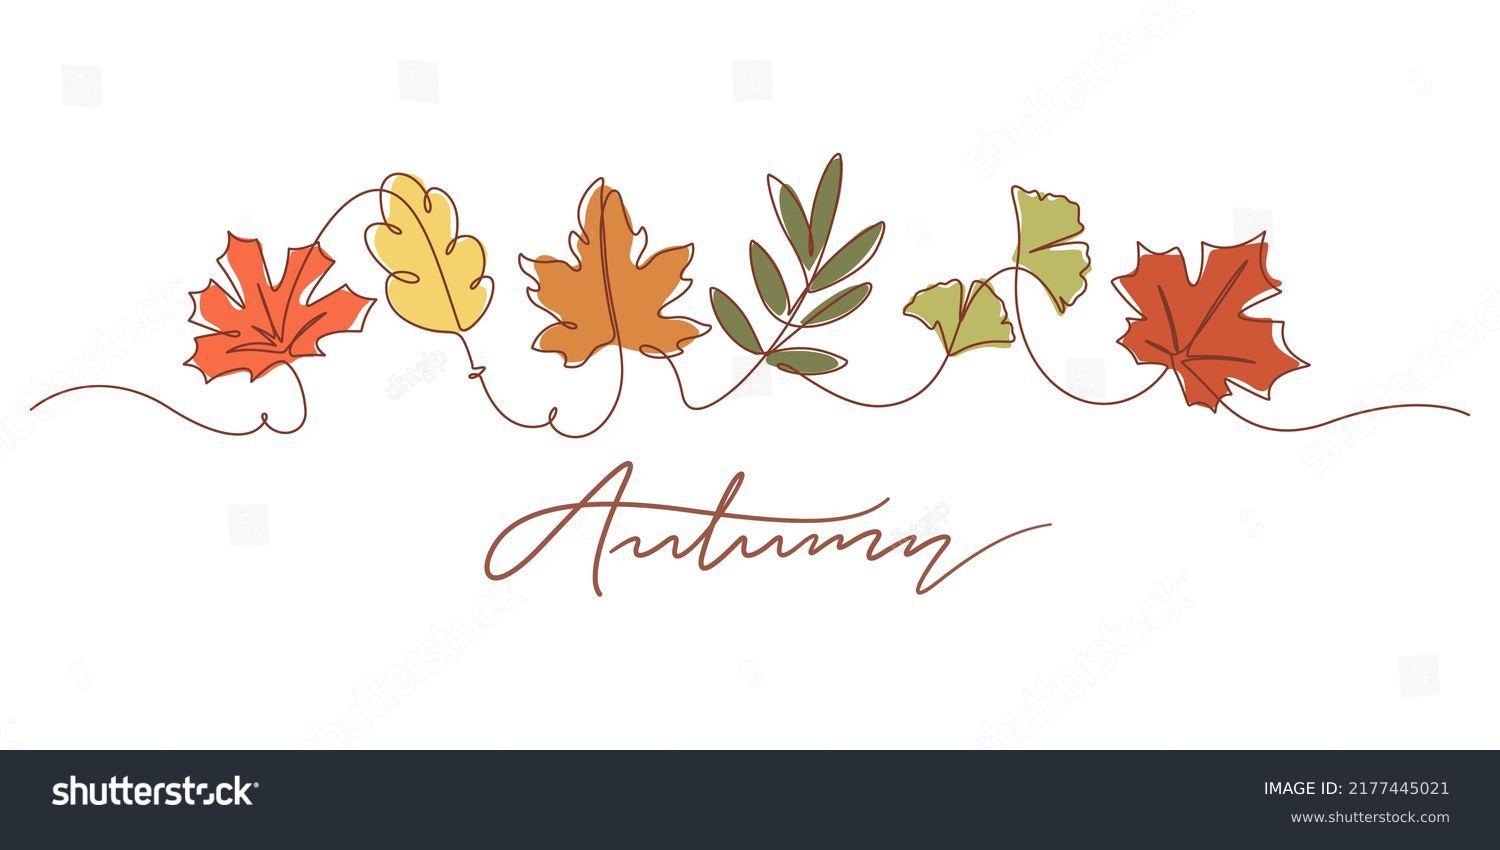 One line drawing of autumn leaf. Autumn script font and leaves isolated on white background vector illustration.  #2177445021